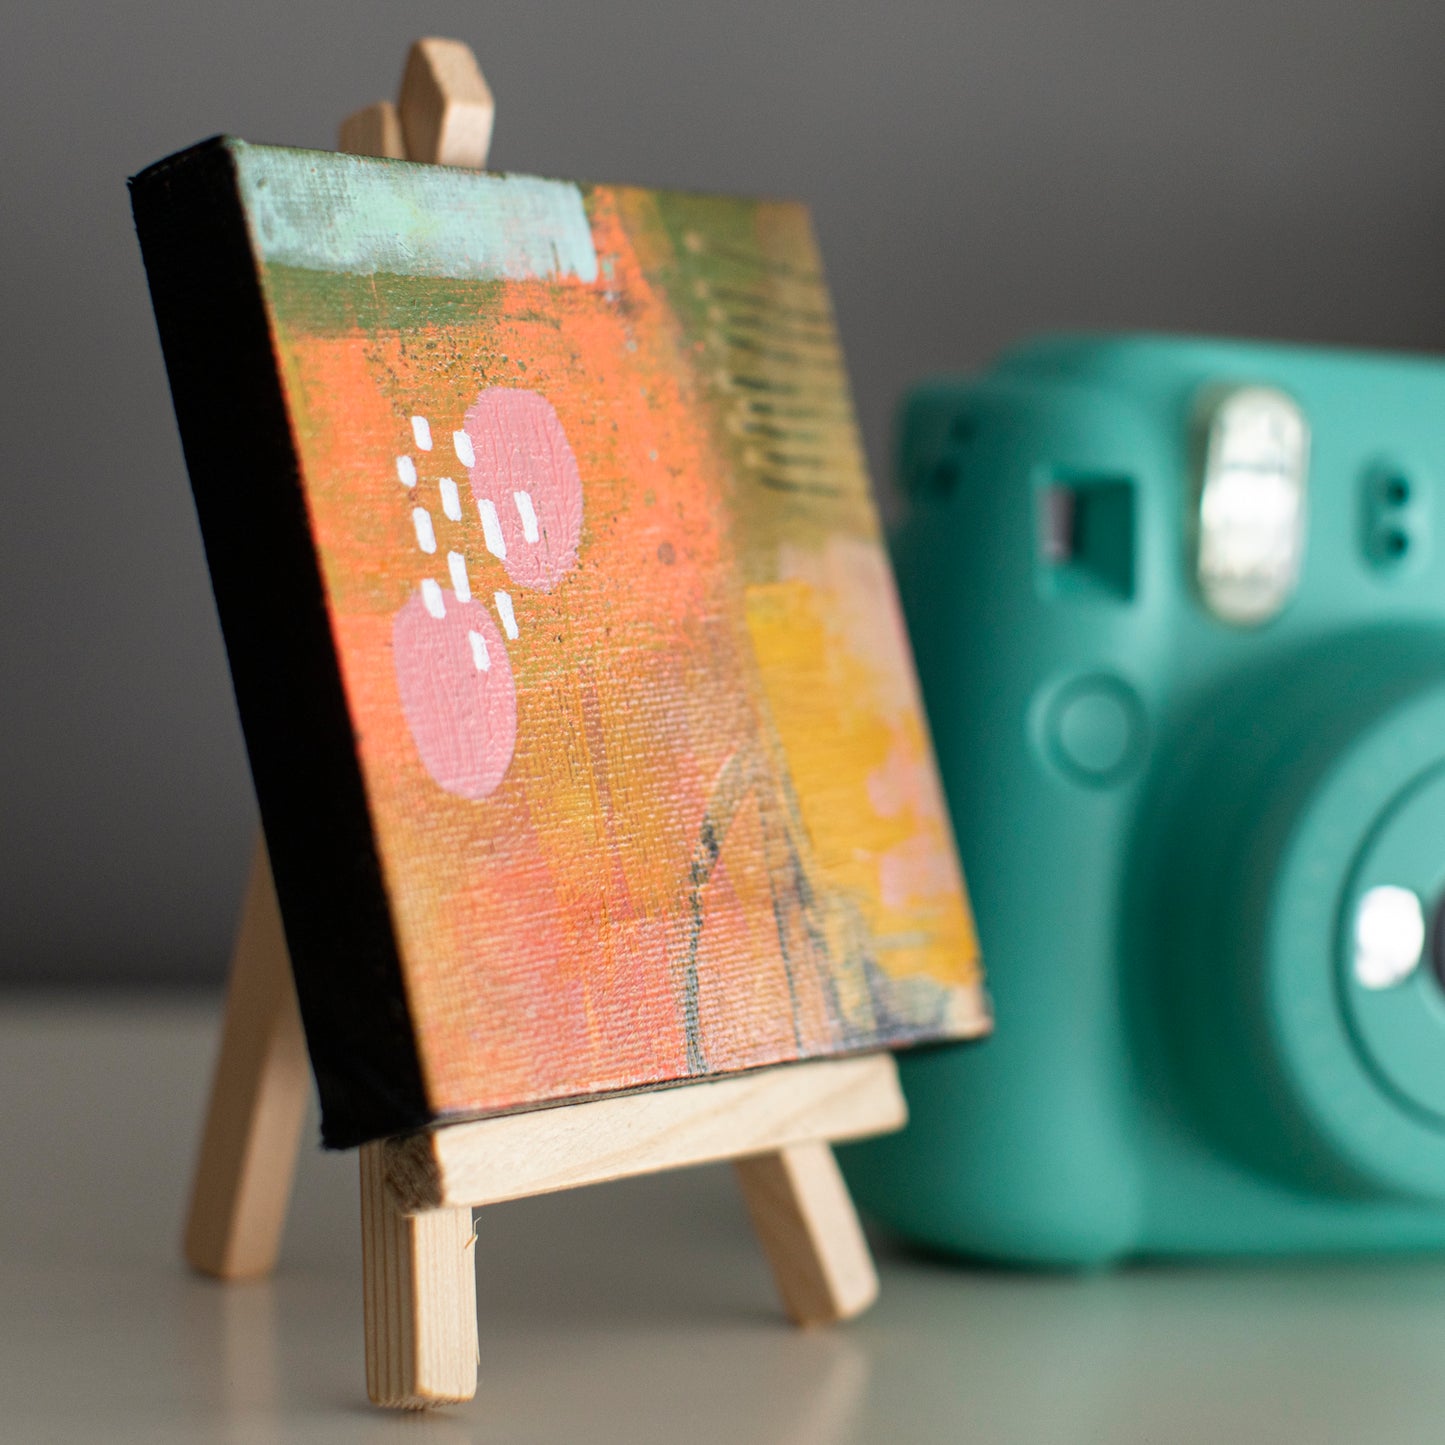 "Mini 2" - 4"x 4" canvas and easel